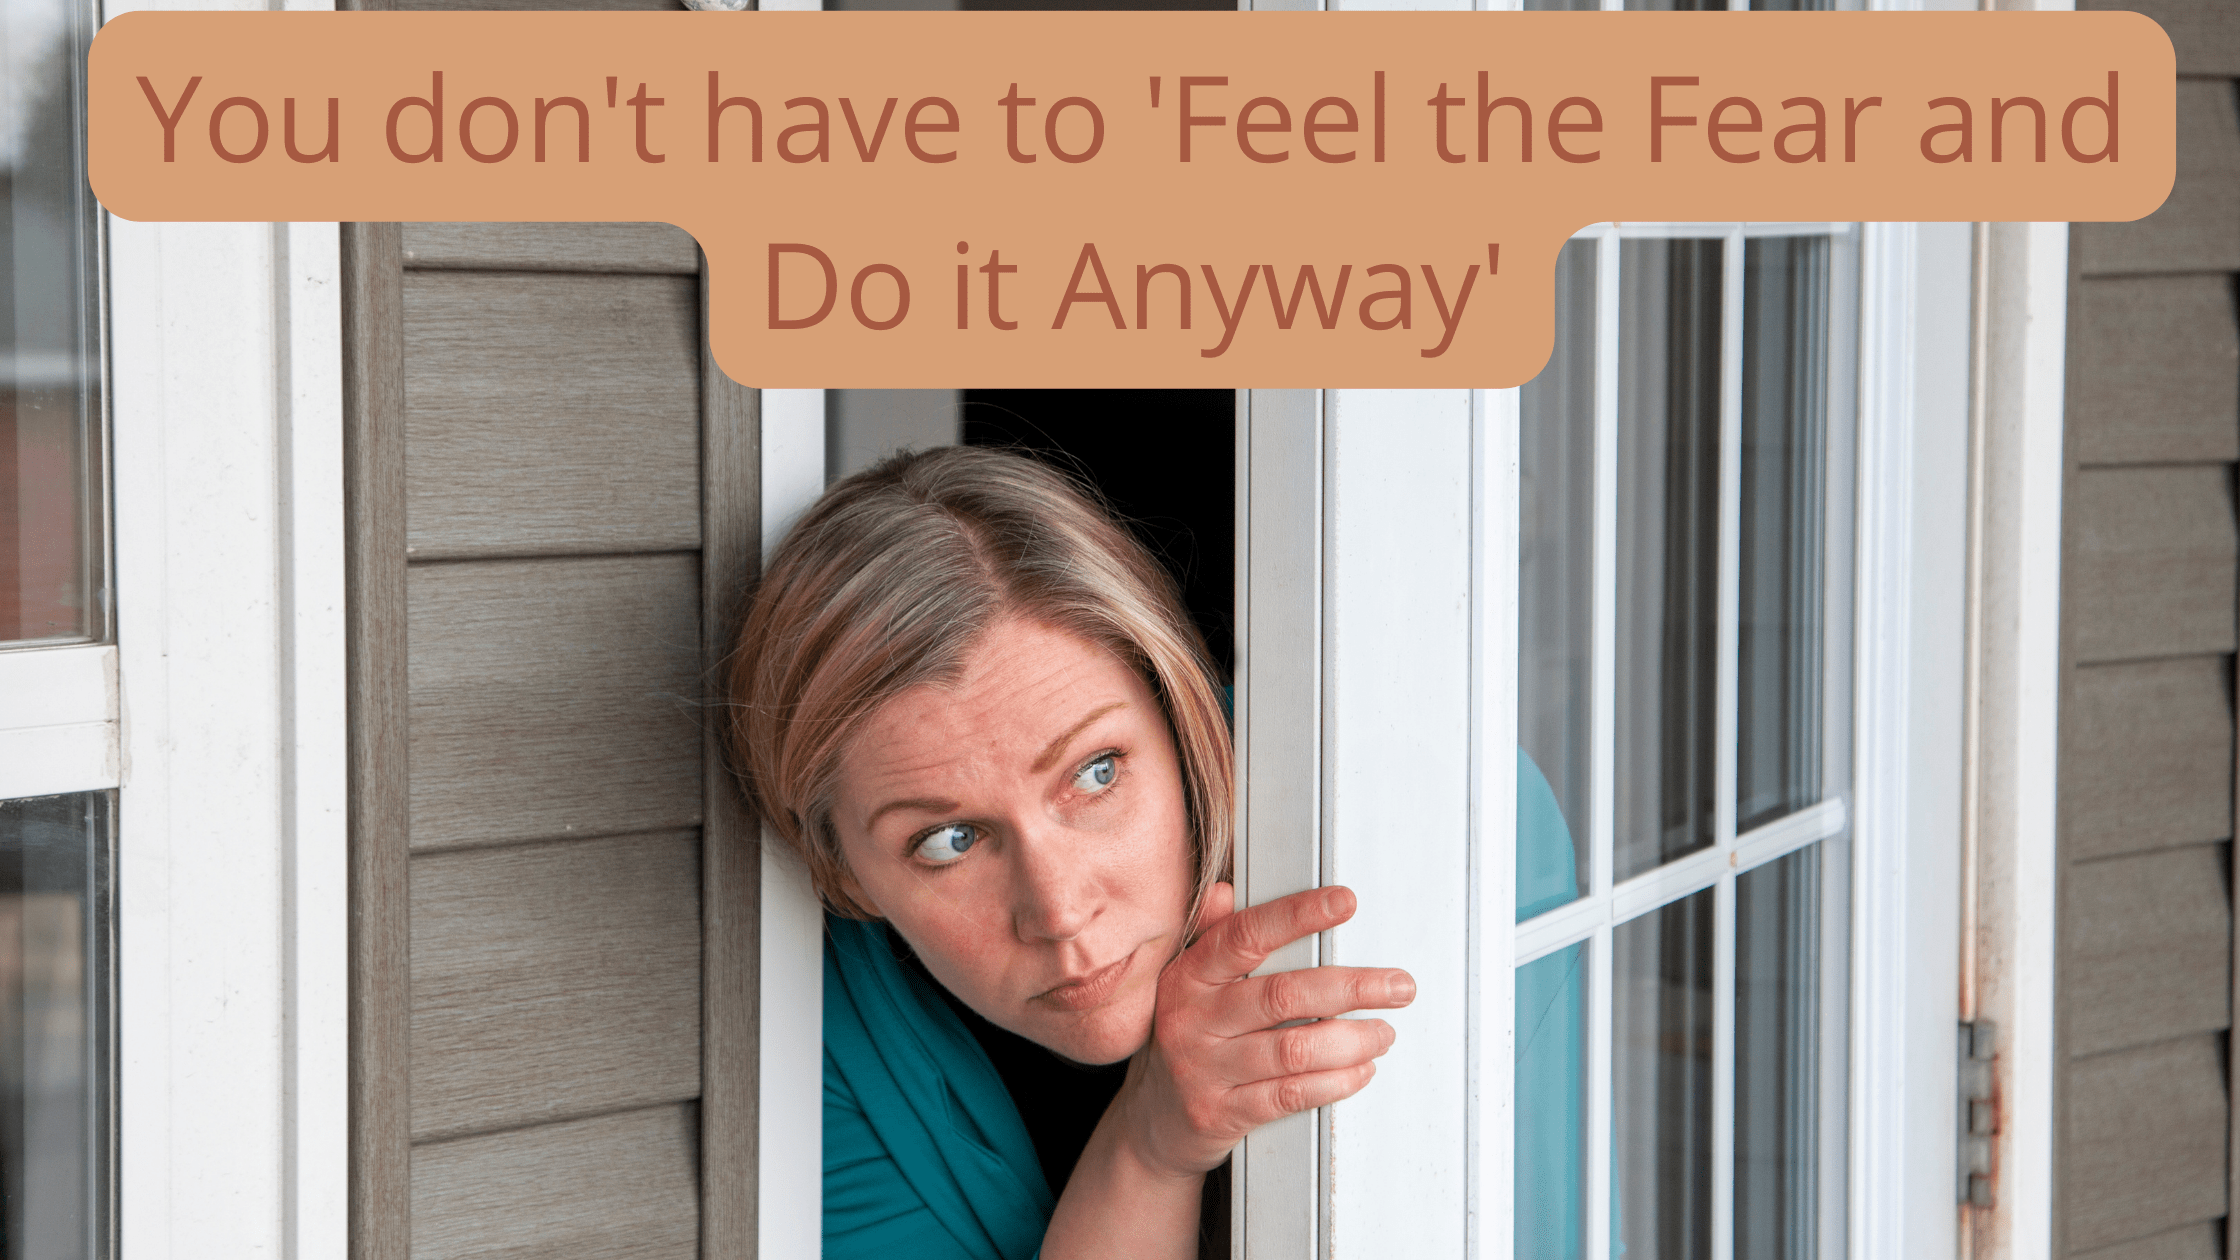 You don't have to 'Feel the fear and do it anyway'